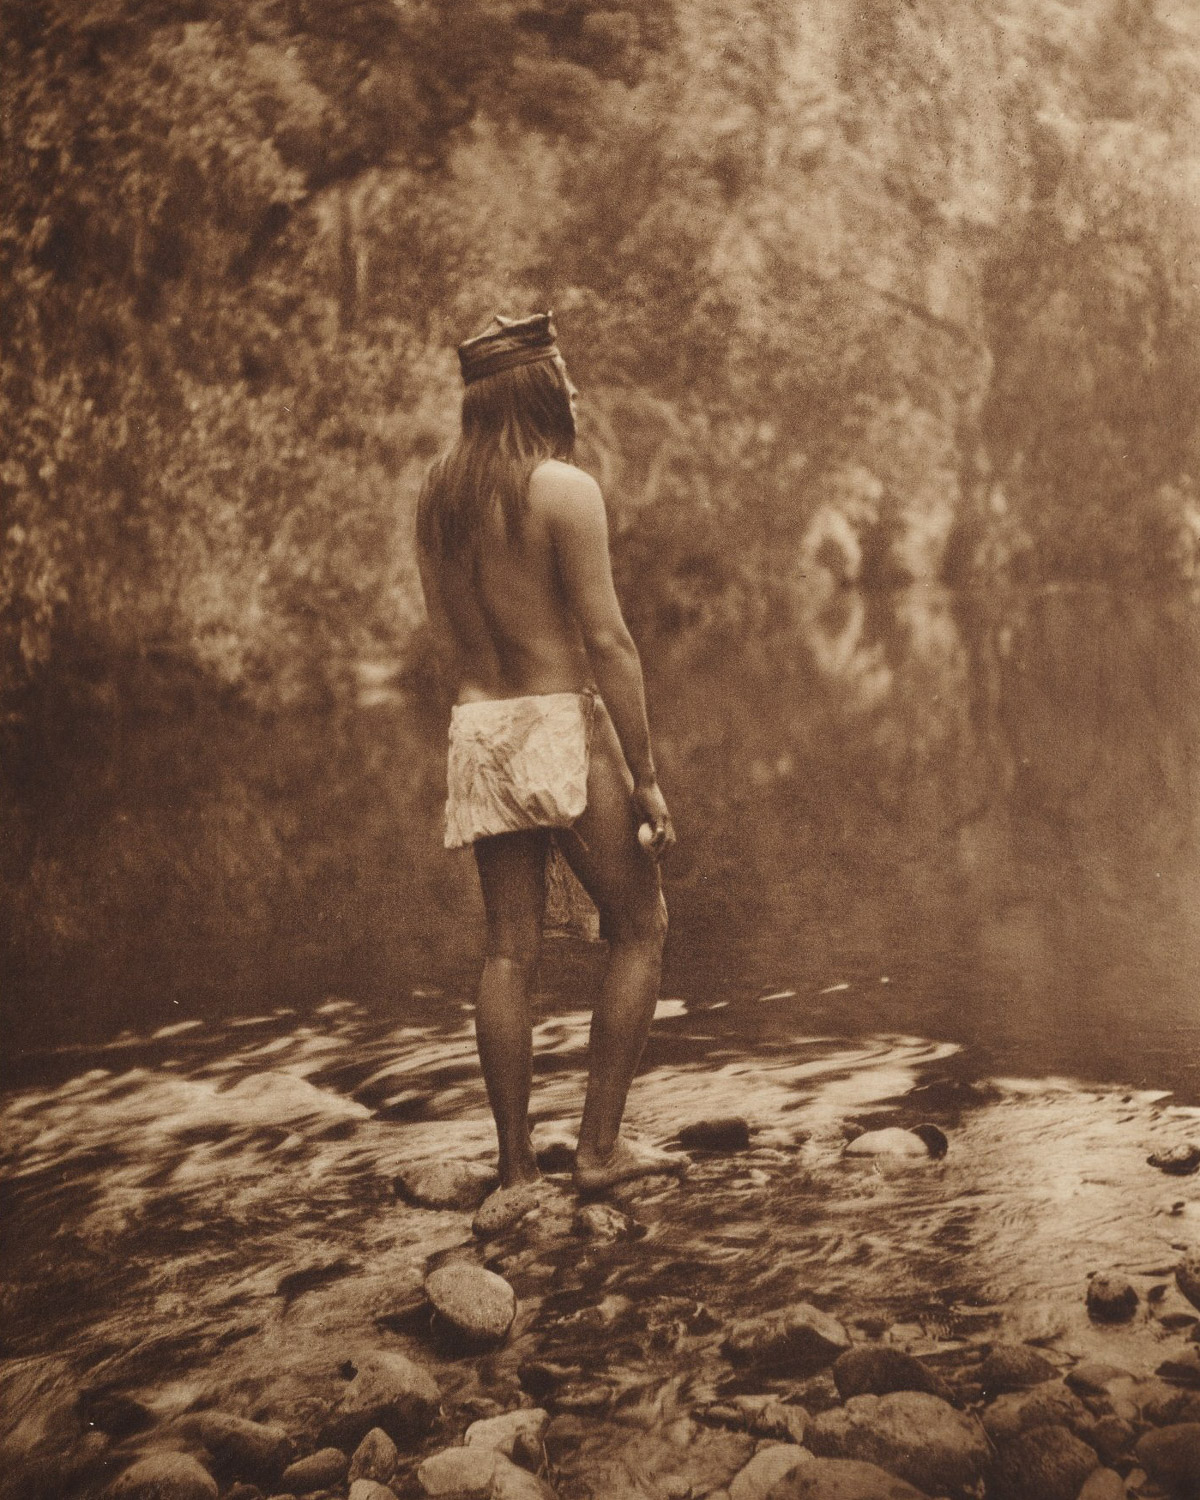 1,000+ Haunting & Beautiful Photos of Native American Peoples, (...) - @Open Culture Artes & contextos curtis4x5 16